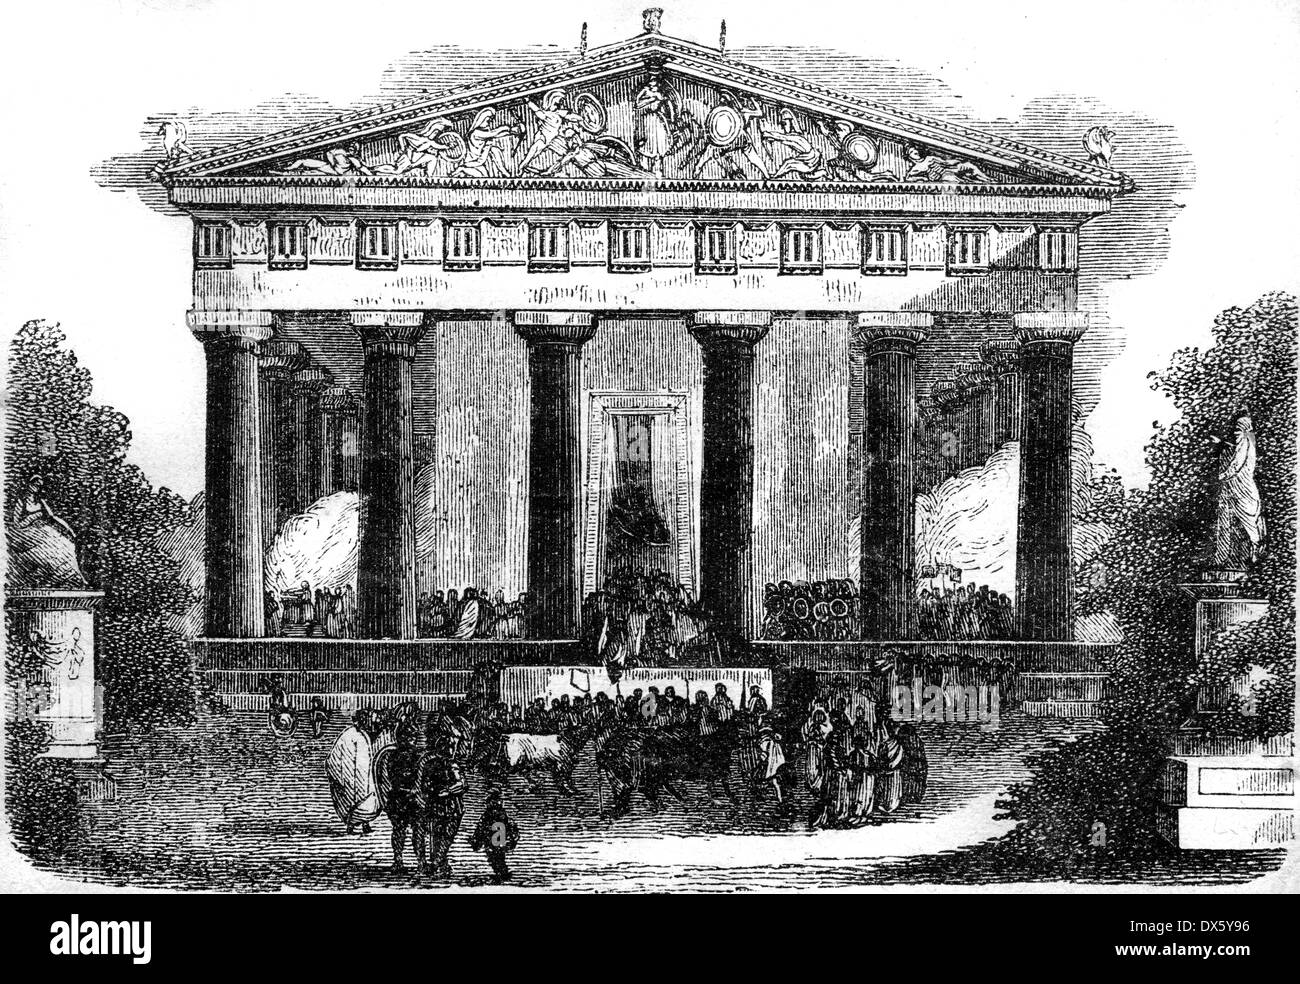 Ancient Greek temple, illustration from book dated 1878 Stock Photo